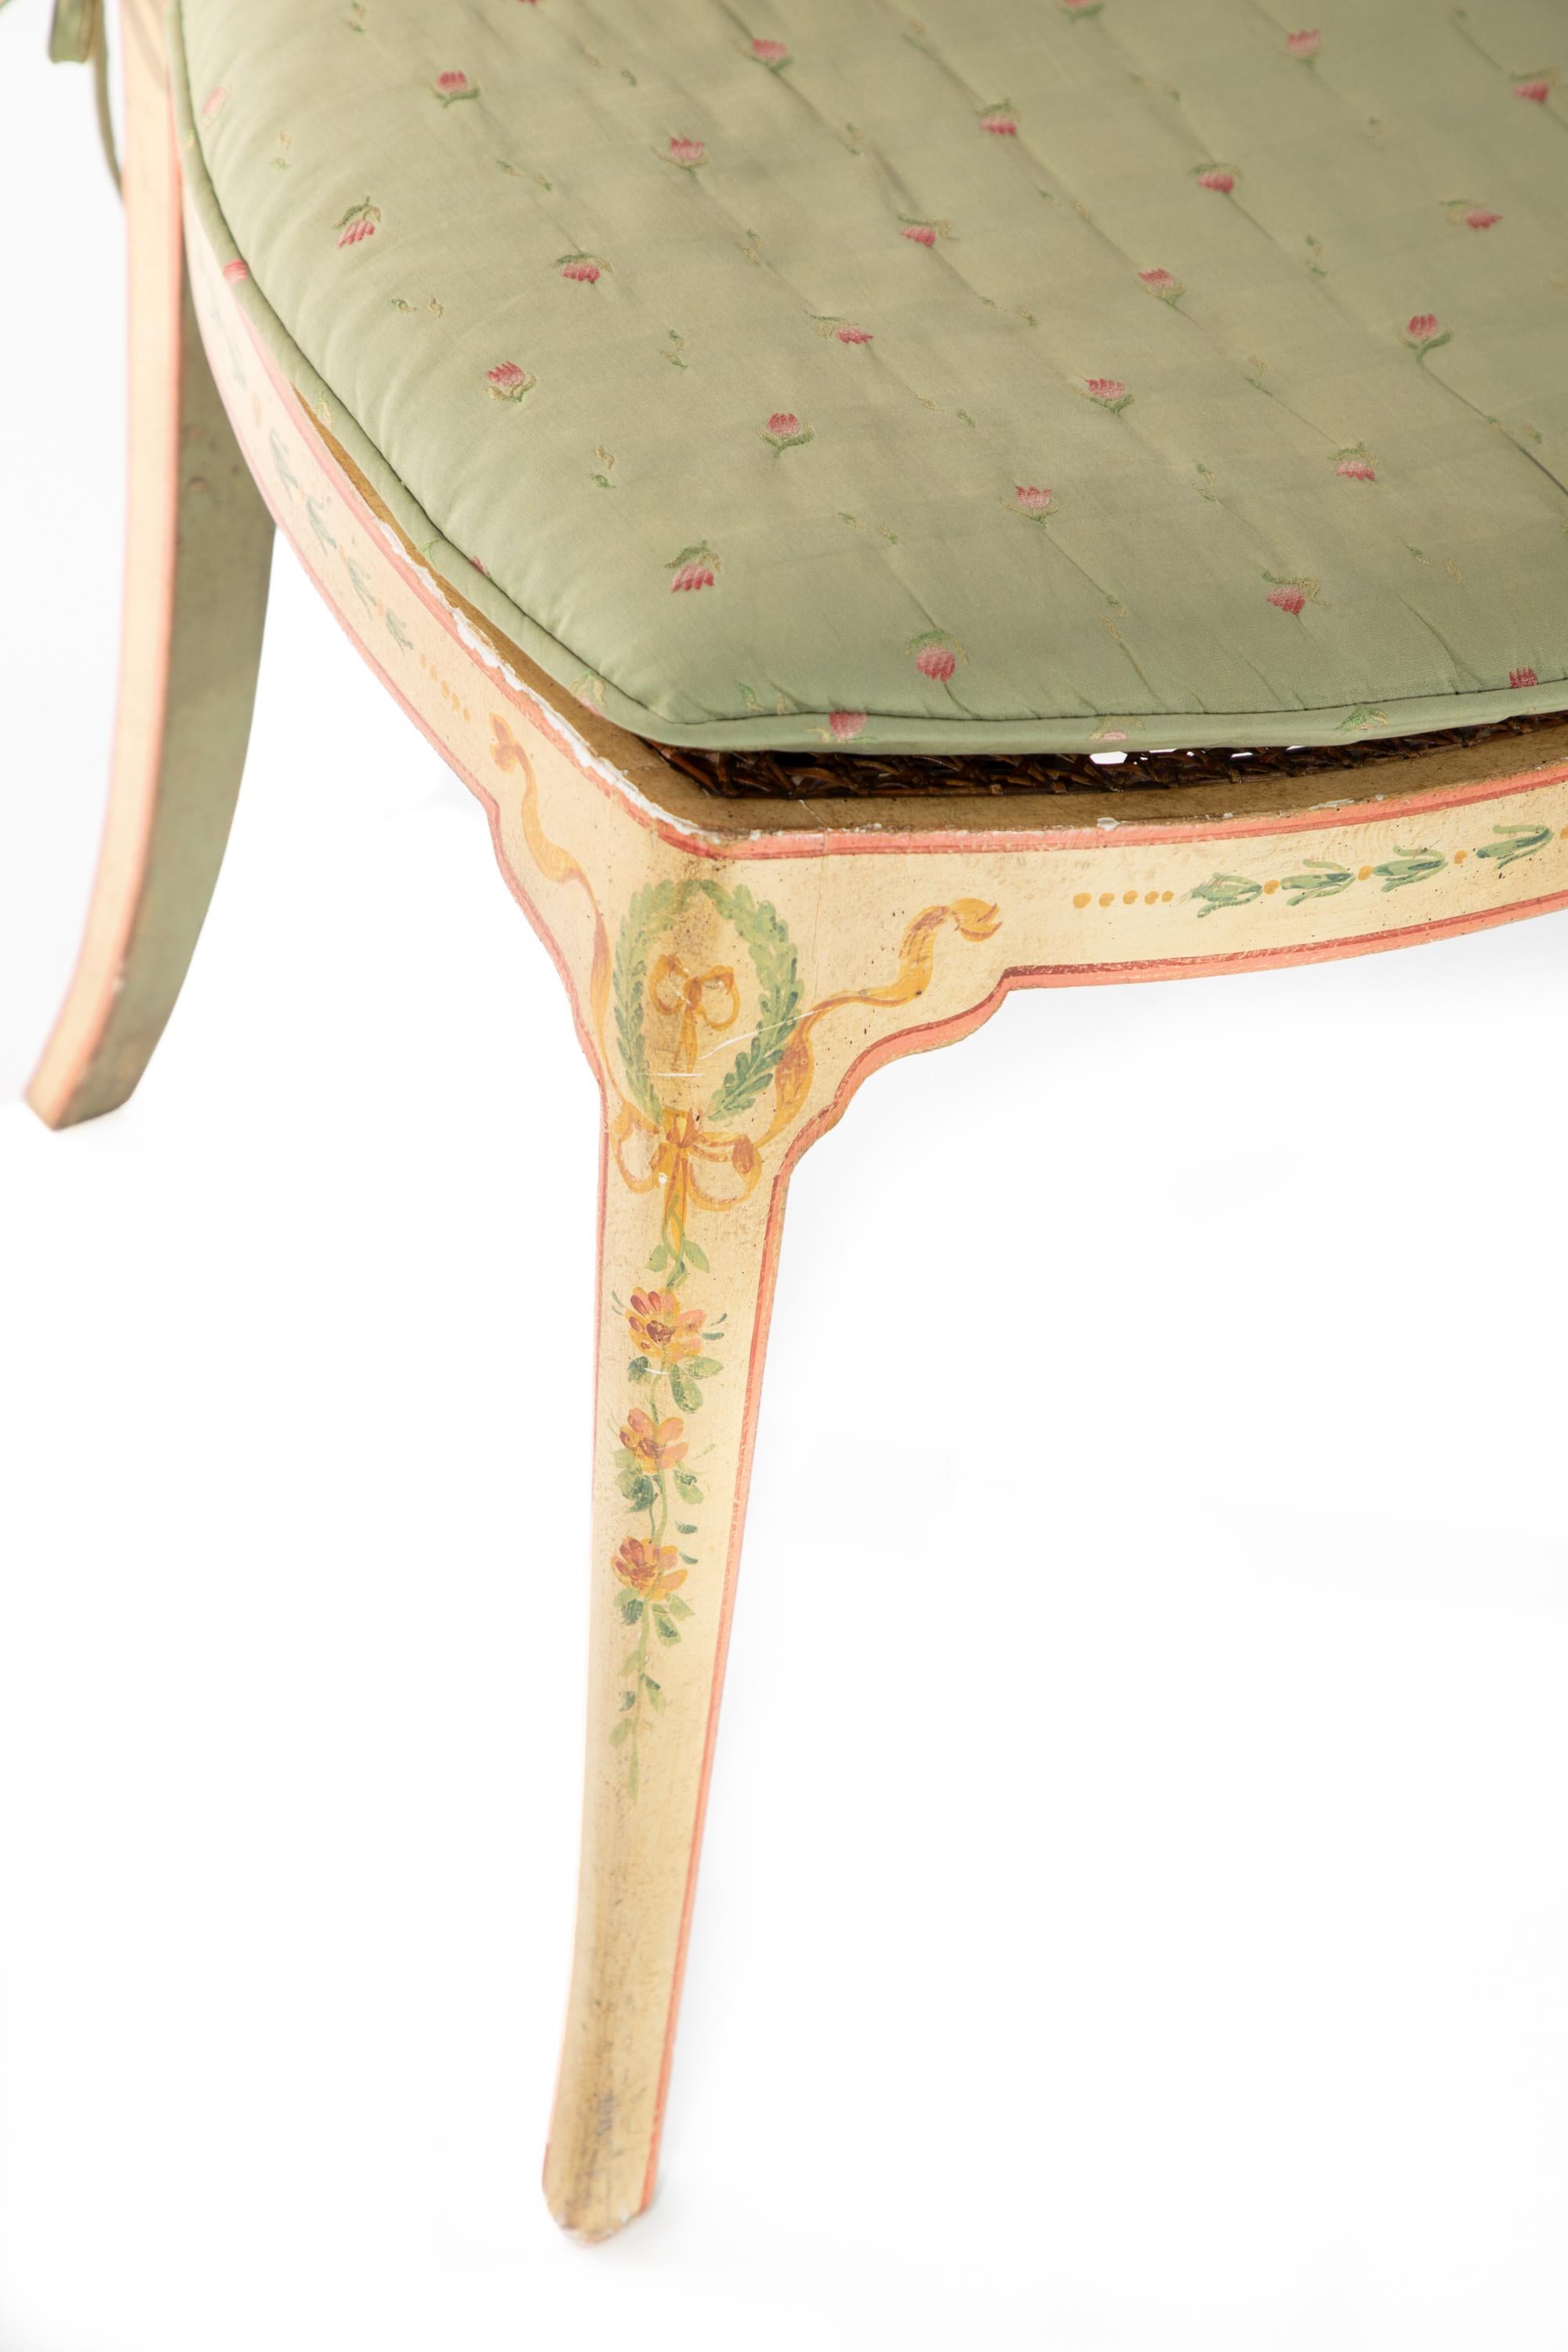 Classico style wooden chair by Patina.  Hand painted with flowers and vine designs.
Caned seat and upholstered cushion.
